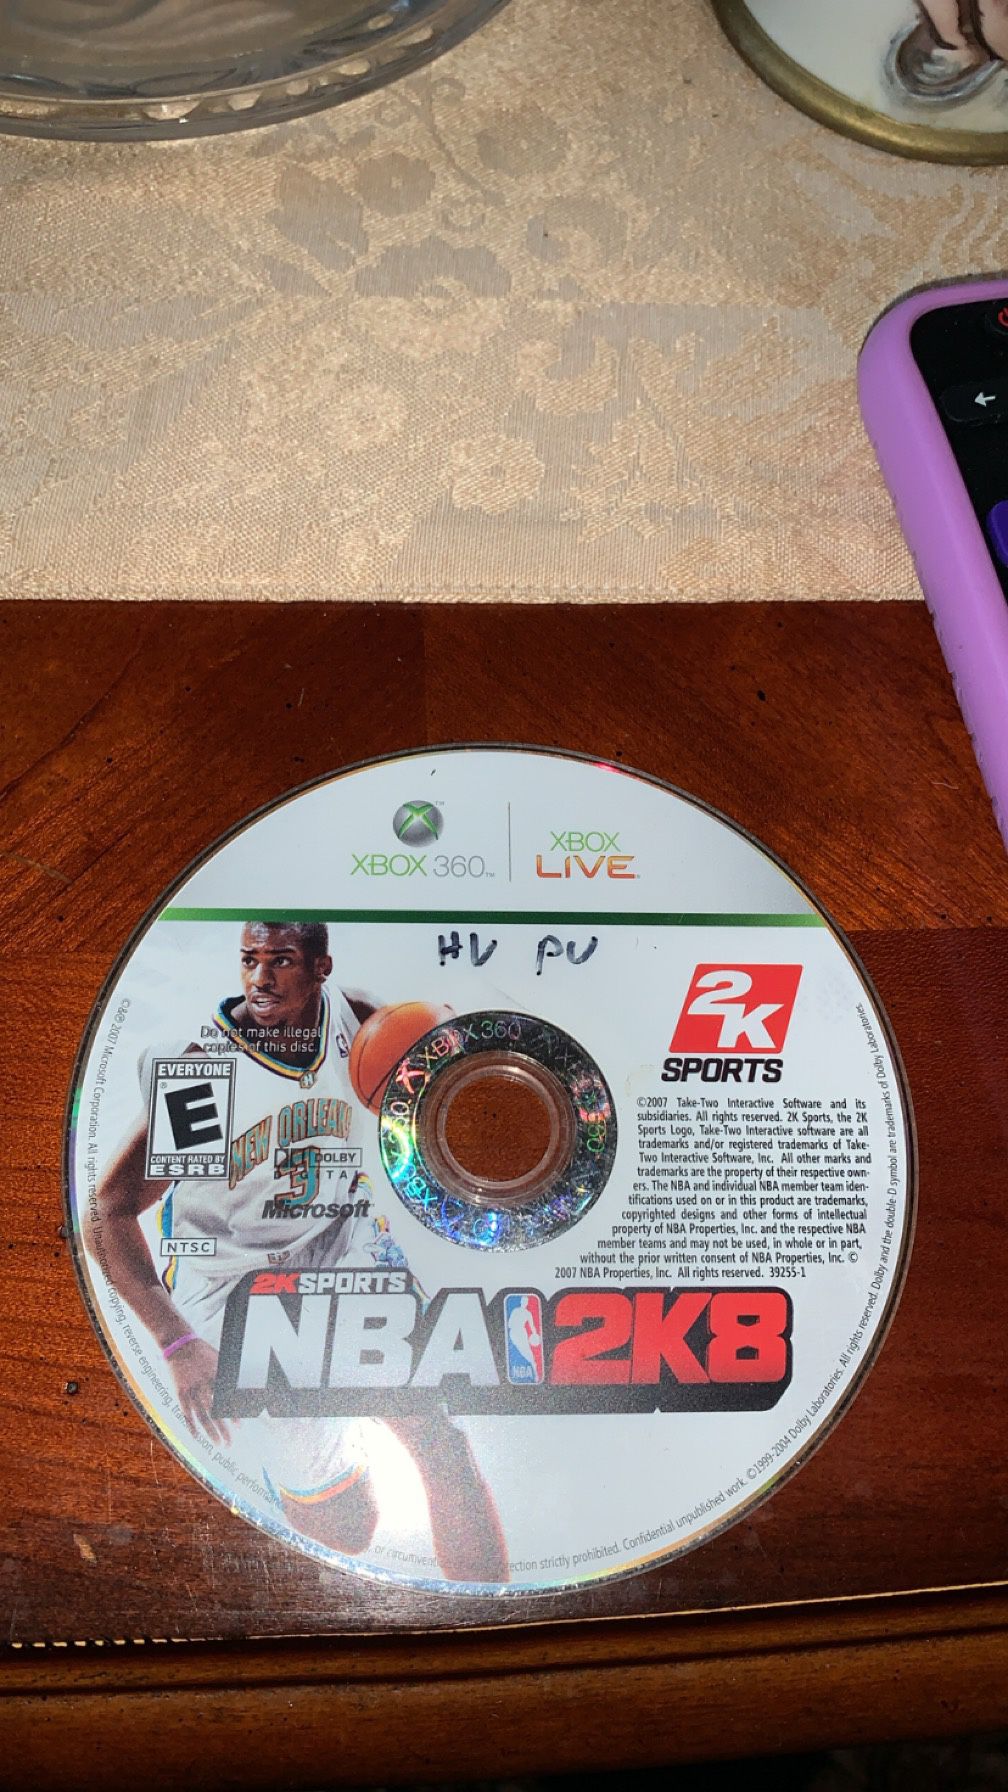 NBA 2K8 (Microsoft Xbox 360) *GAME DISC ONLY - TESTED*